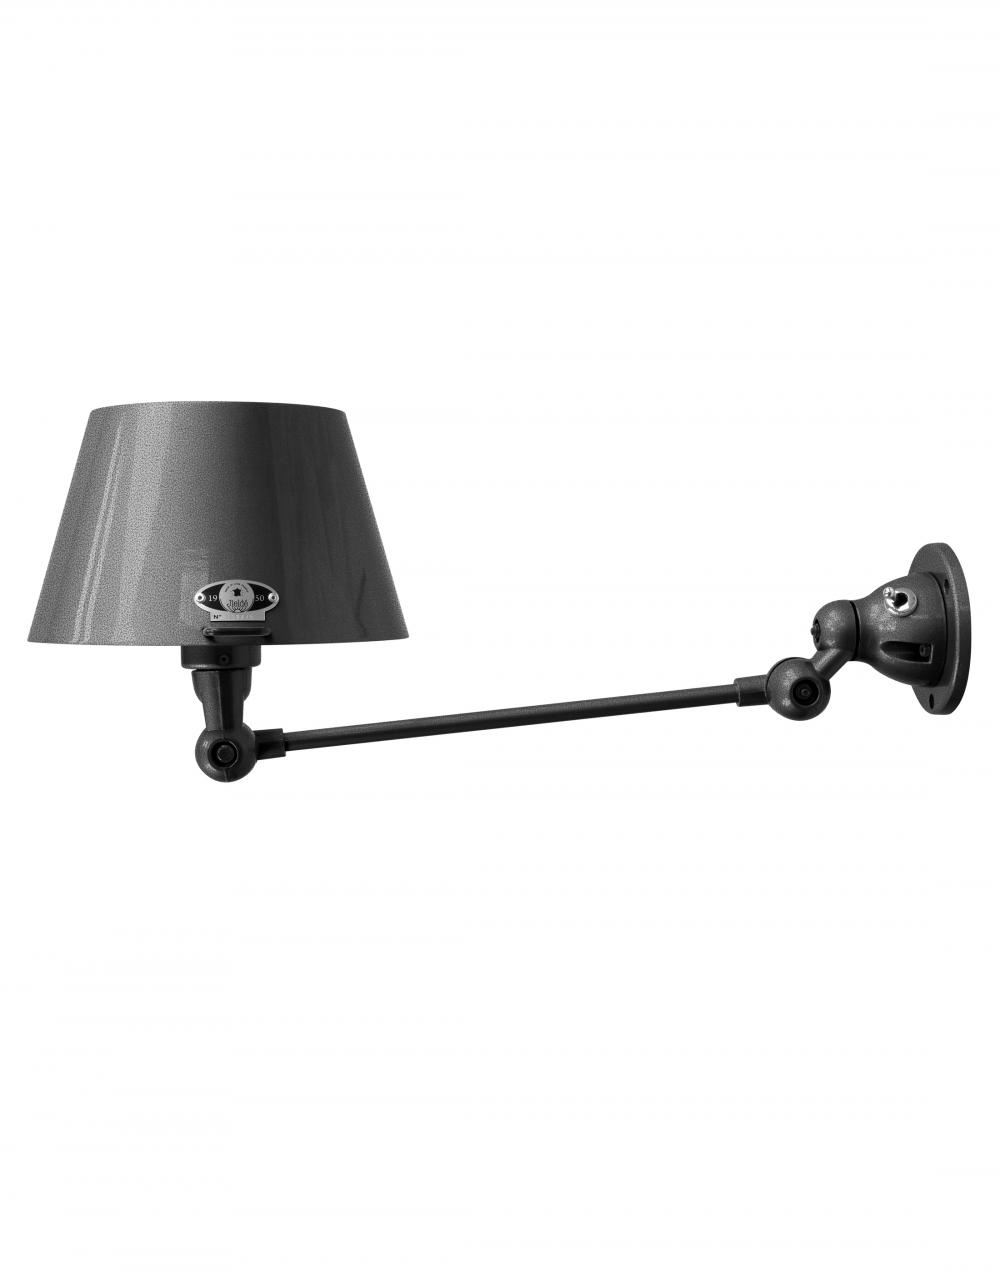 Jielde Aicler One Arm Adjustable Wall Light Straight Shade Black Hammered Gloss Integral Switch On Wall Base